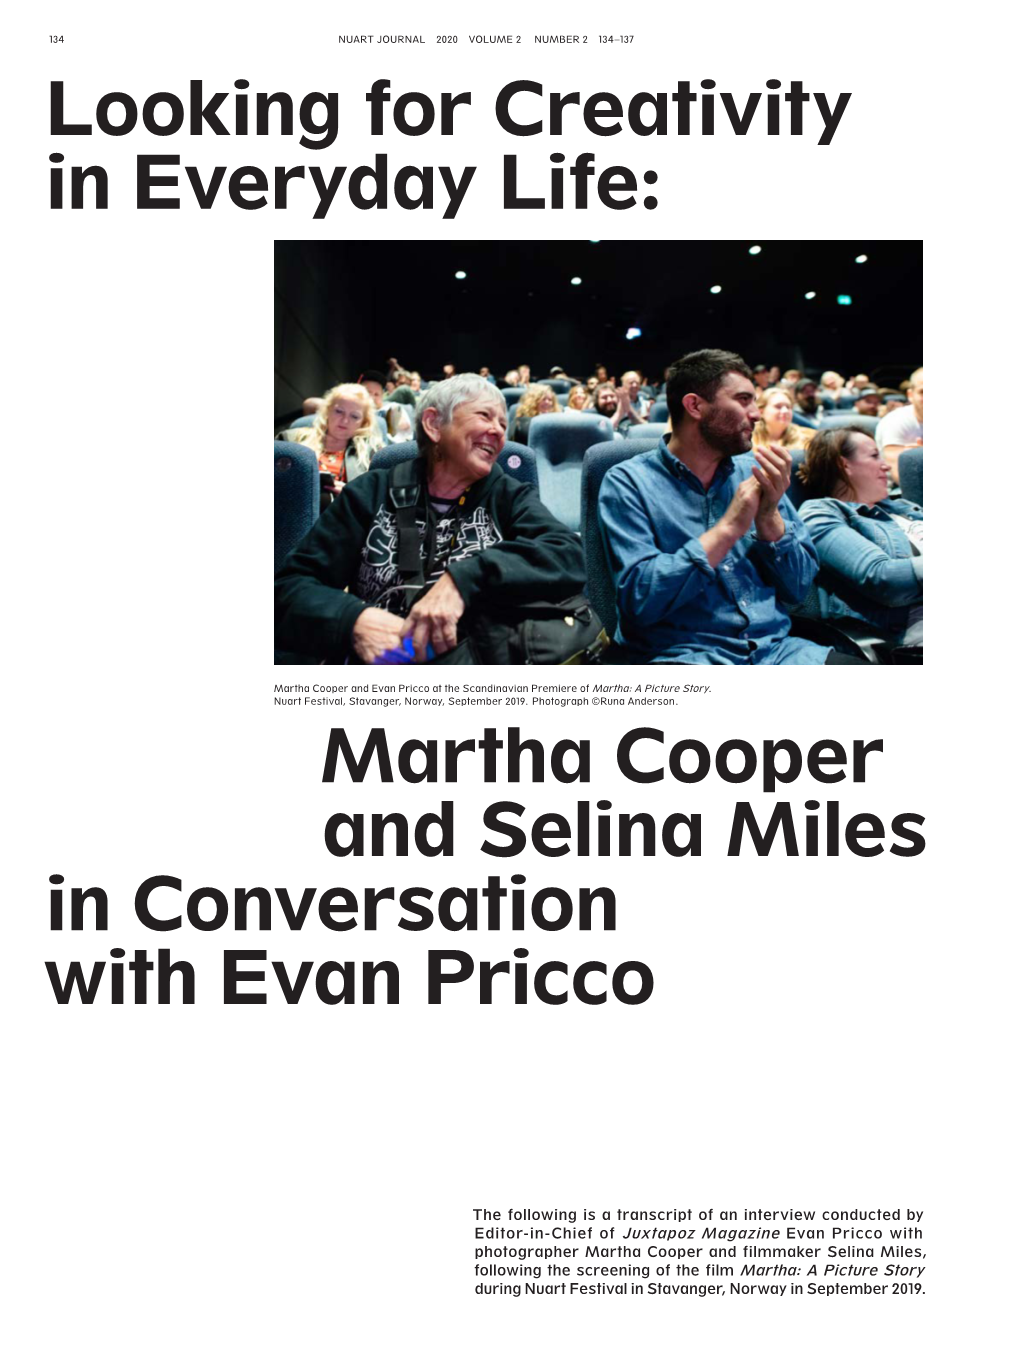 Martha Cooper and Selina Miles in Conversation with Evan Pricco